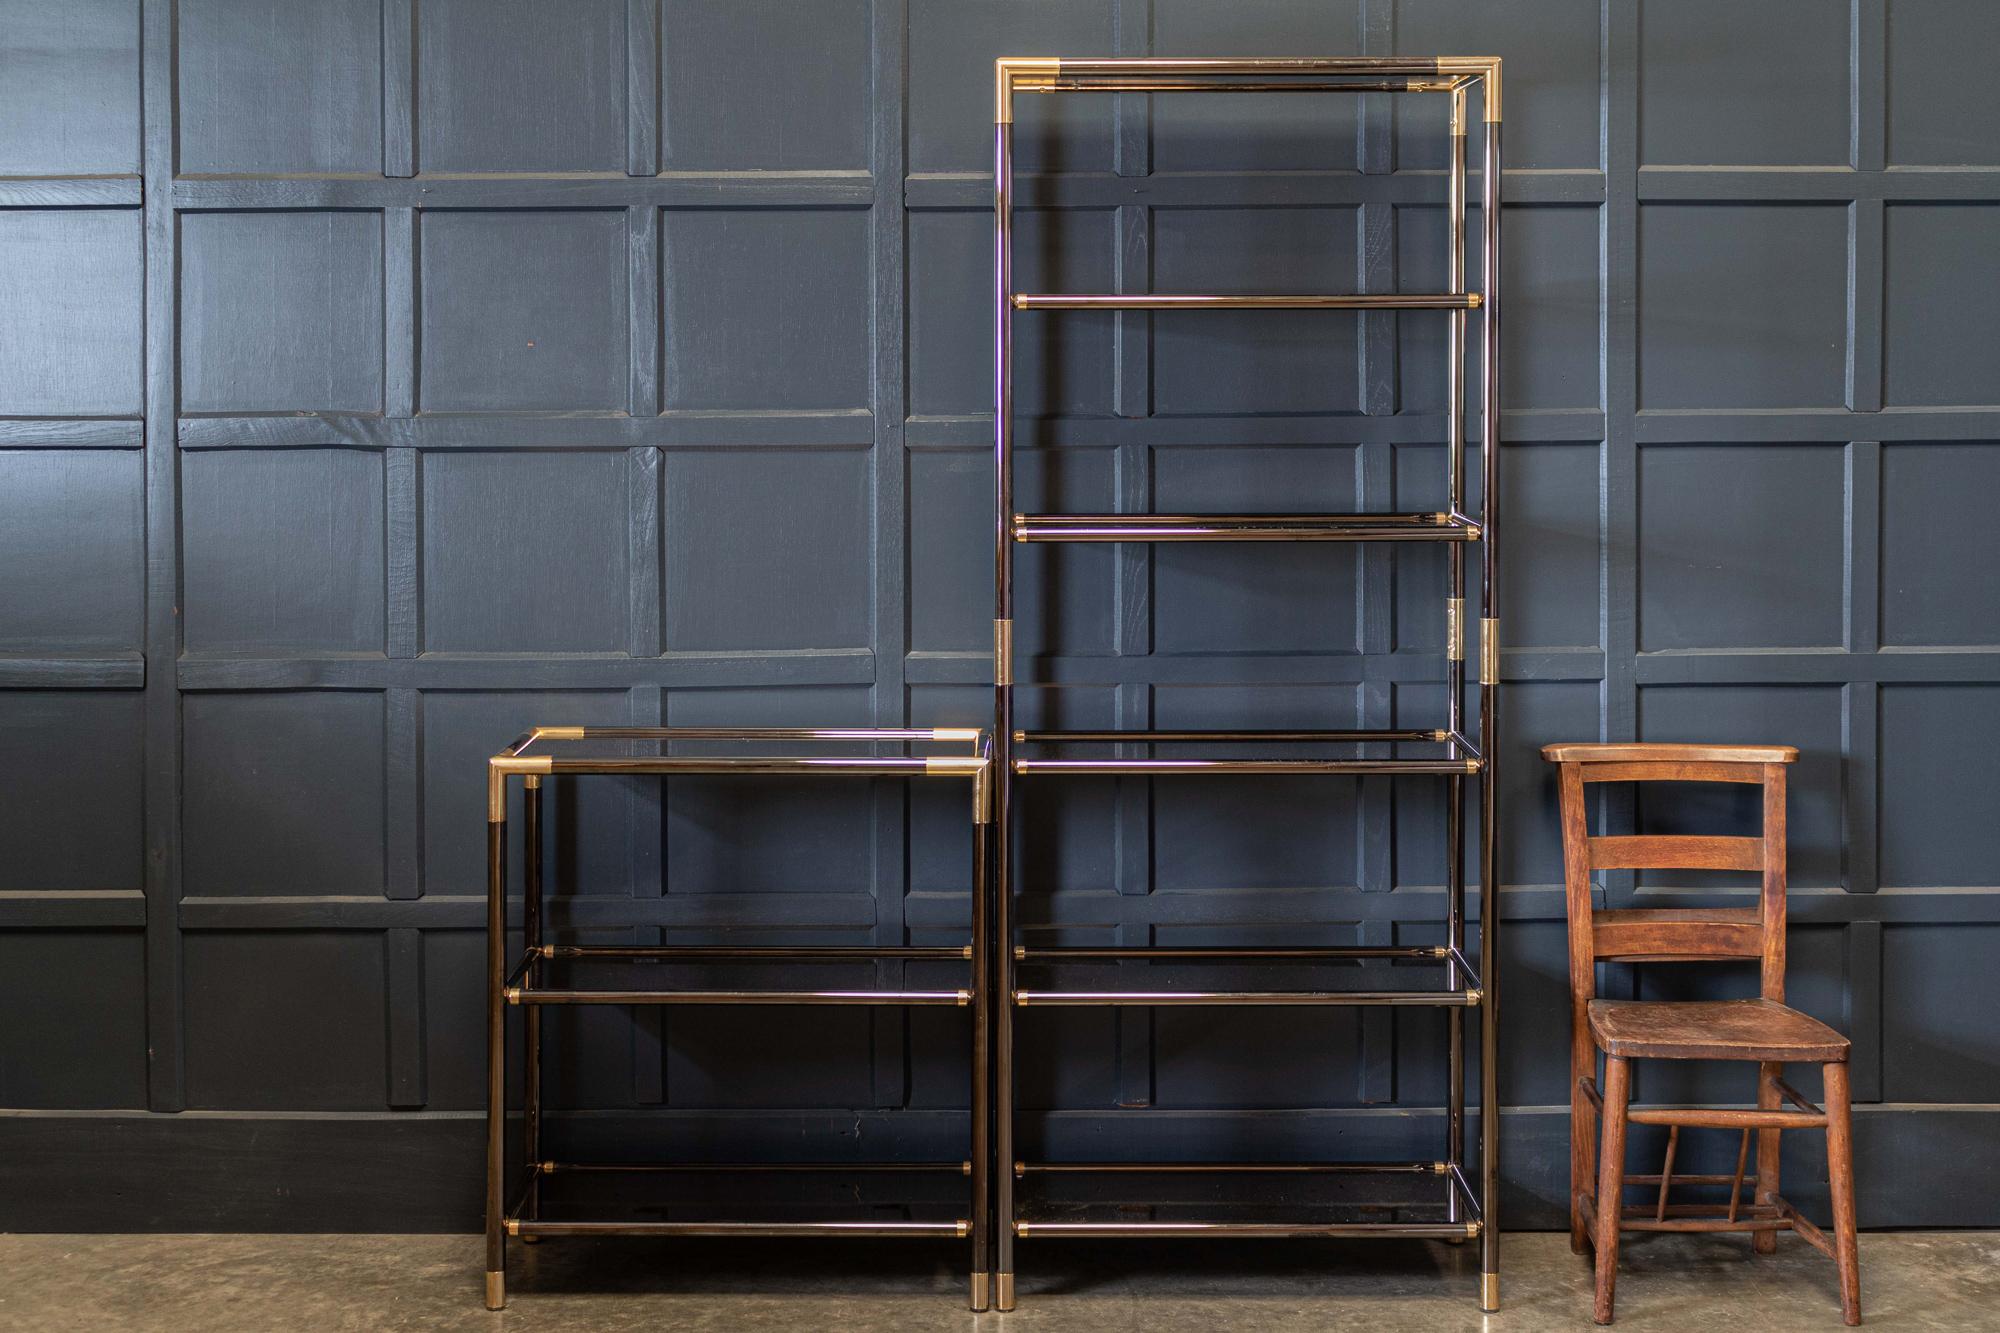 Pair of French mid century etageres shelving
Circa 1960's.

Pair of French mid century etageres shelving in the Maison Jansen’s style. Gunmetal and brass joints with original bronze mirrored glass shelves

(one shelf has a nibble to one the